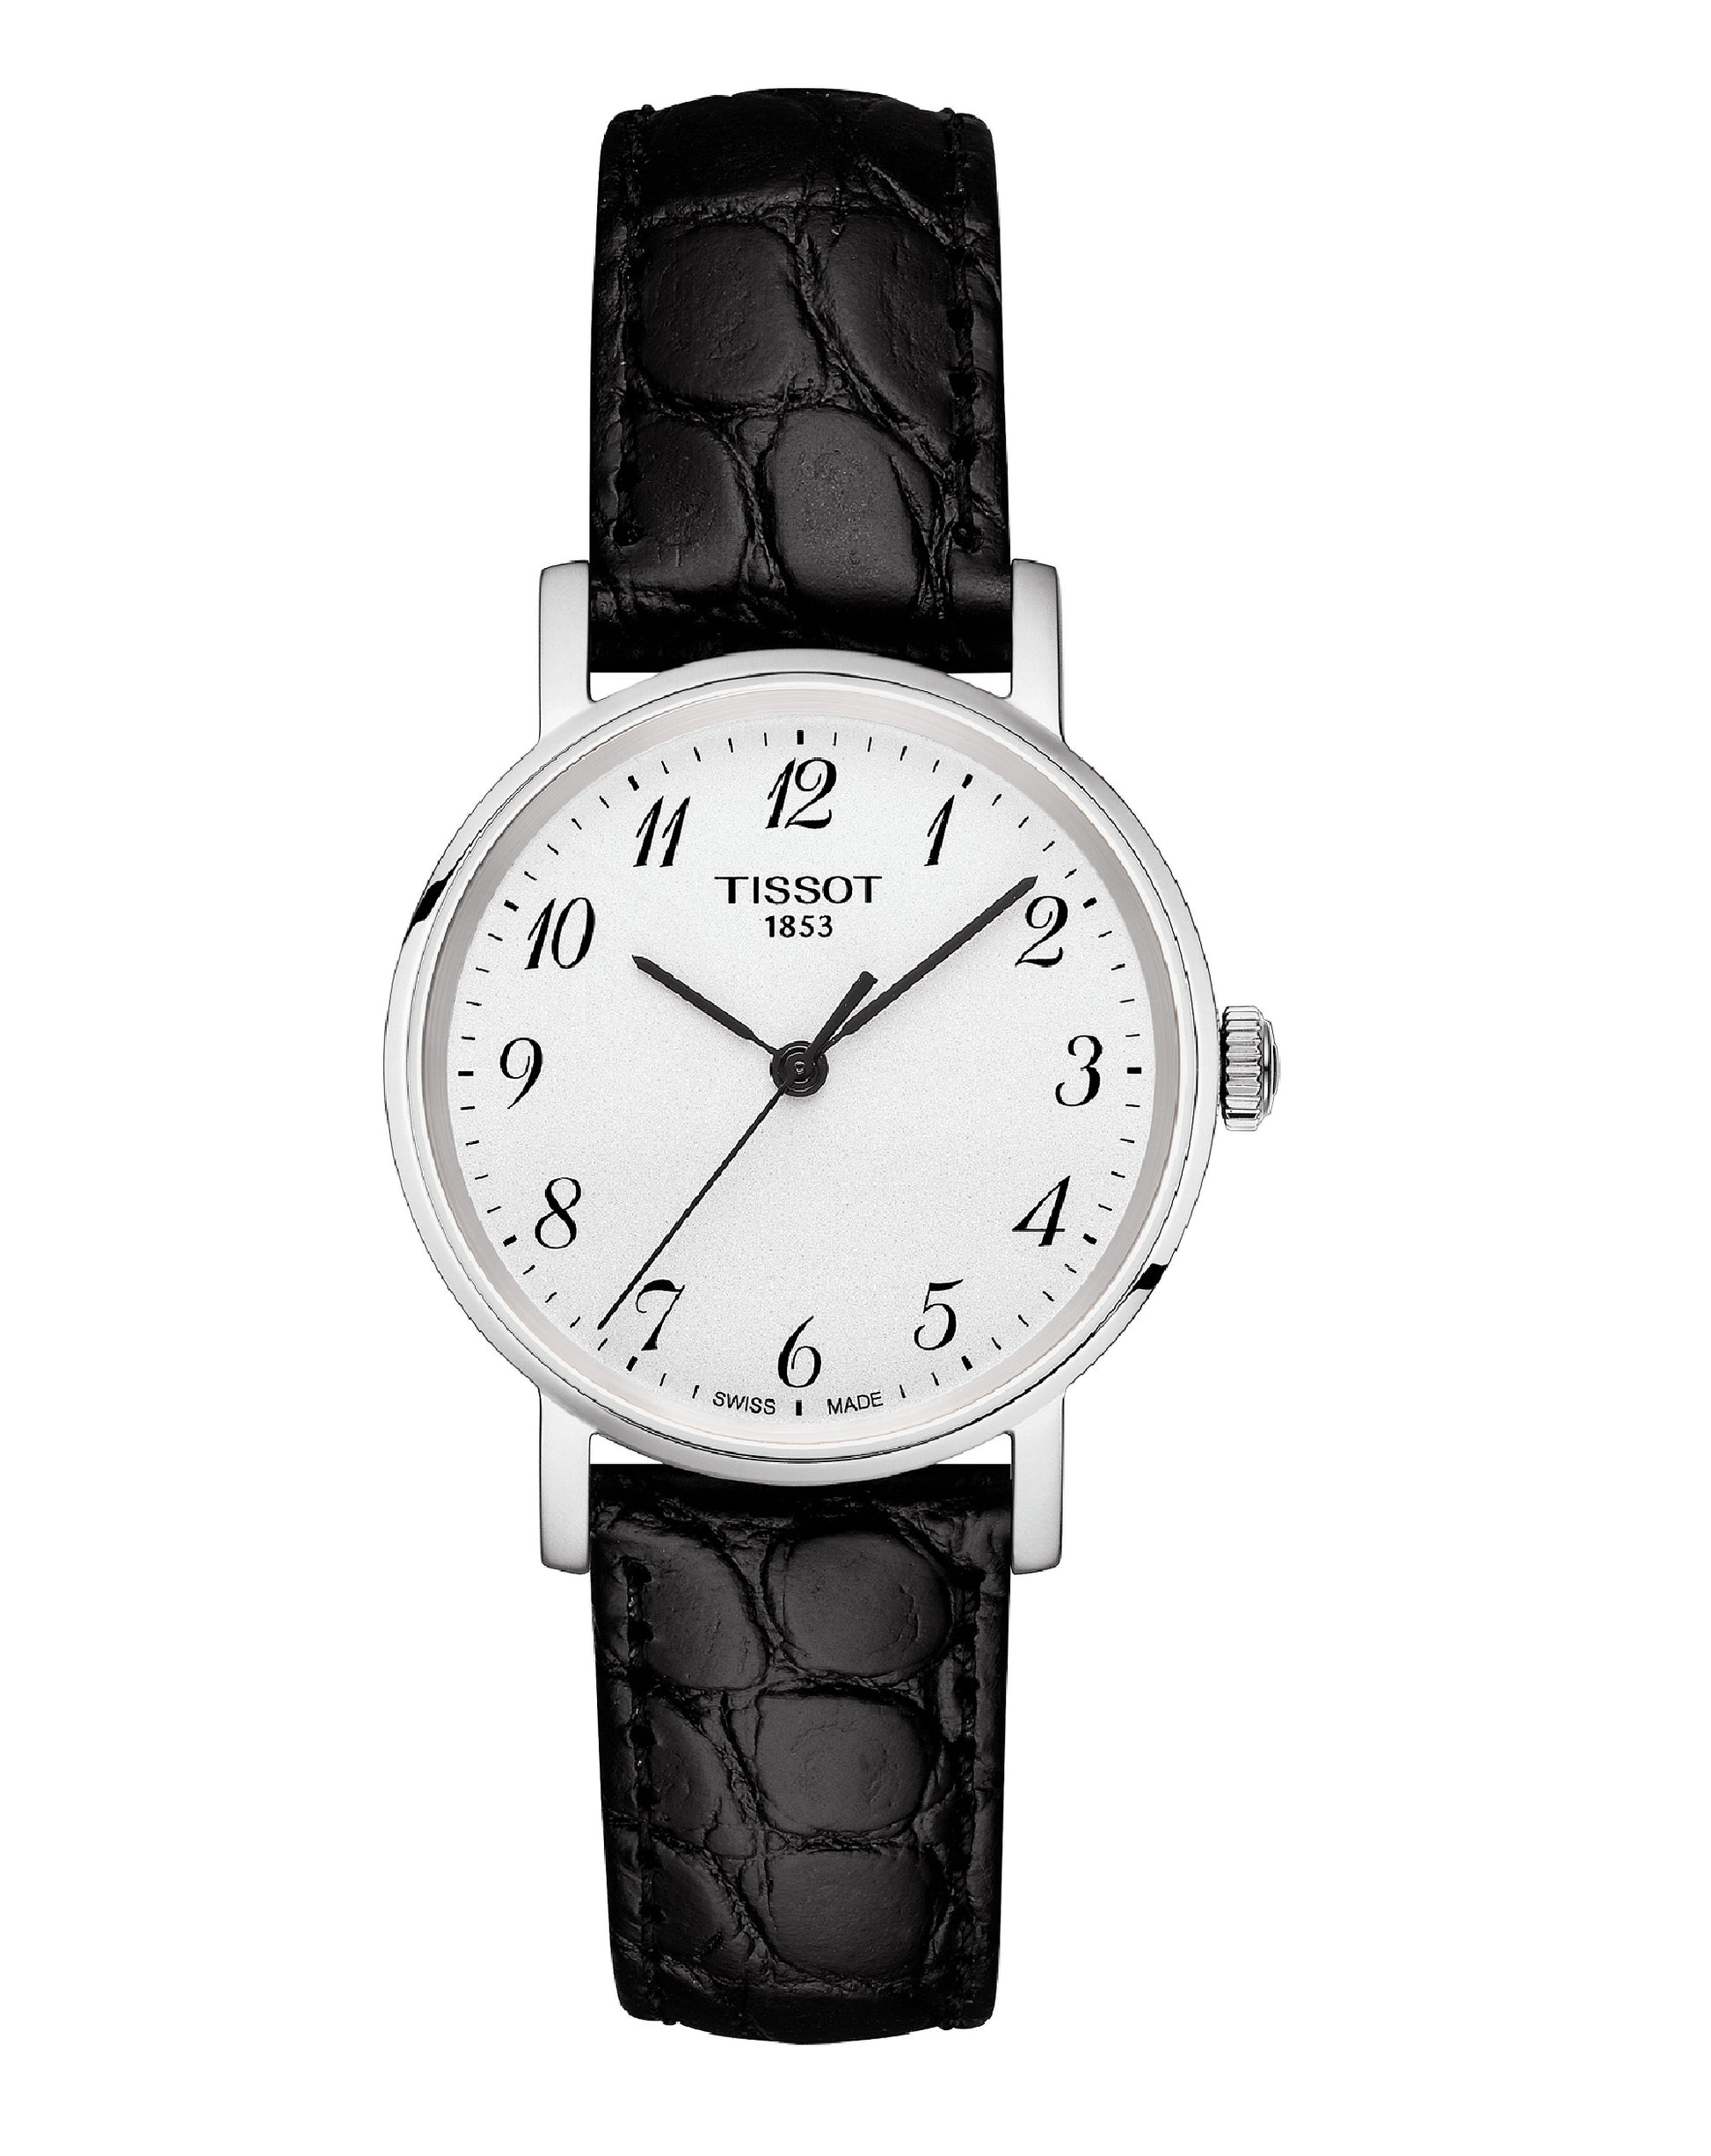 Tissot T109.210.16.032.00 Tissot EVERY TIME SMALL SILVER Black Watch